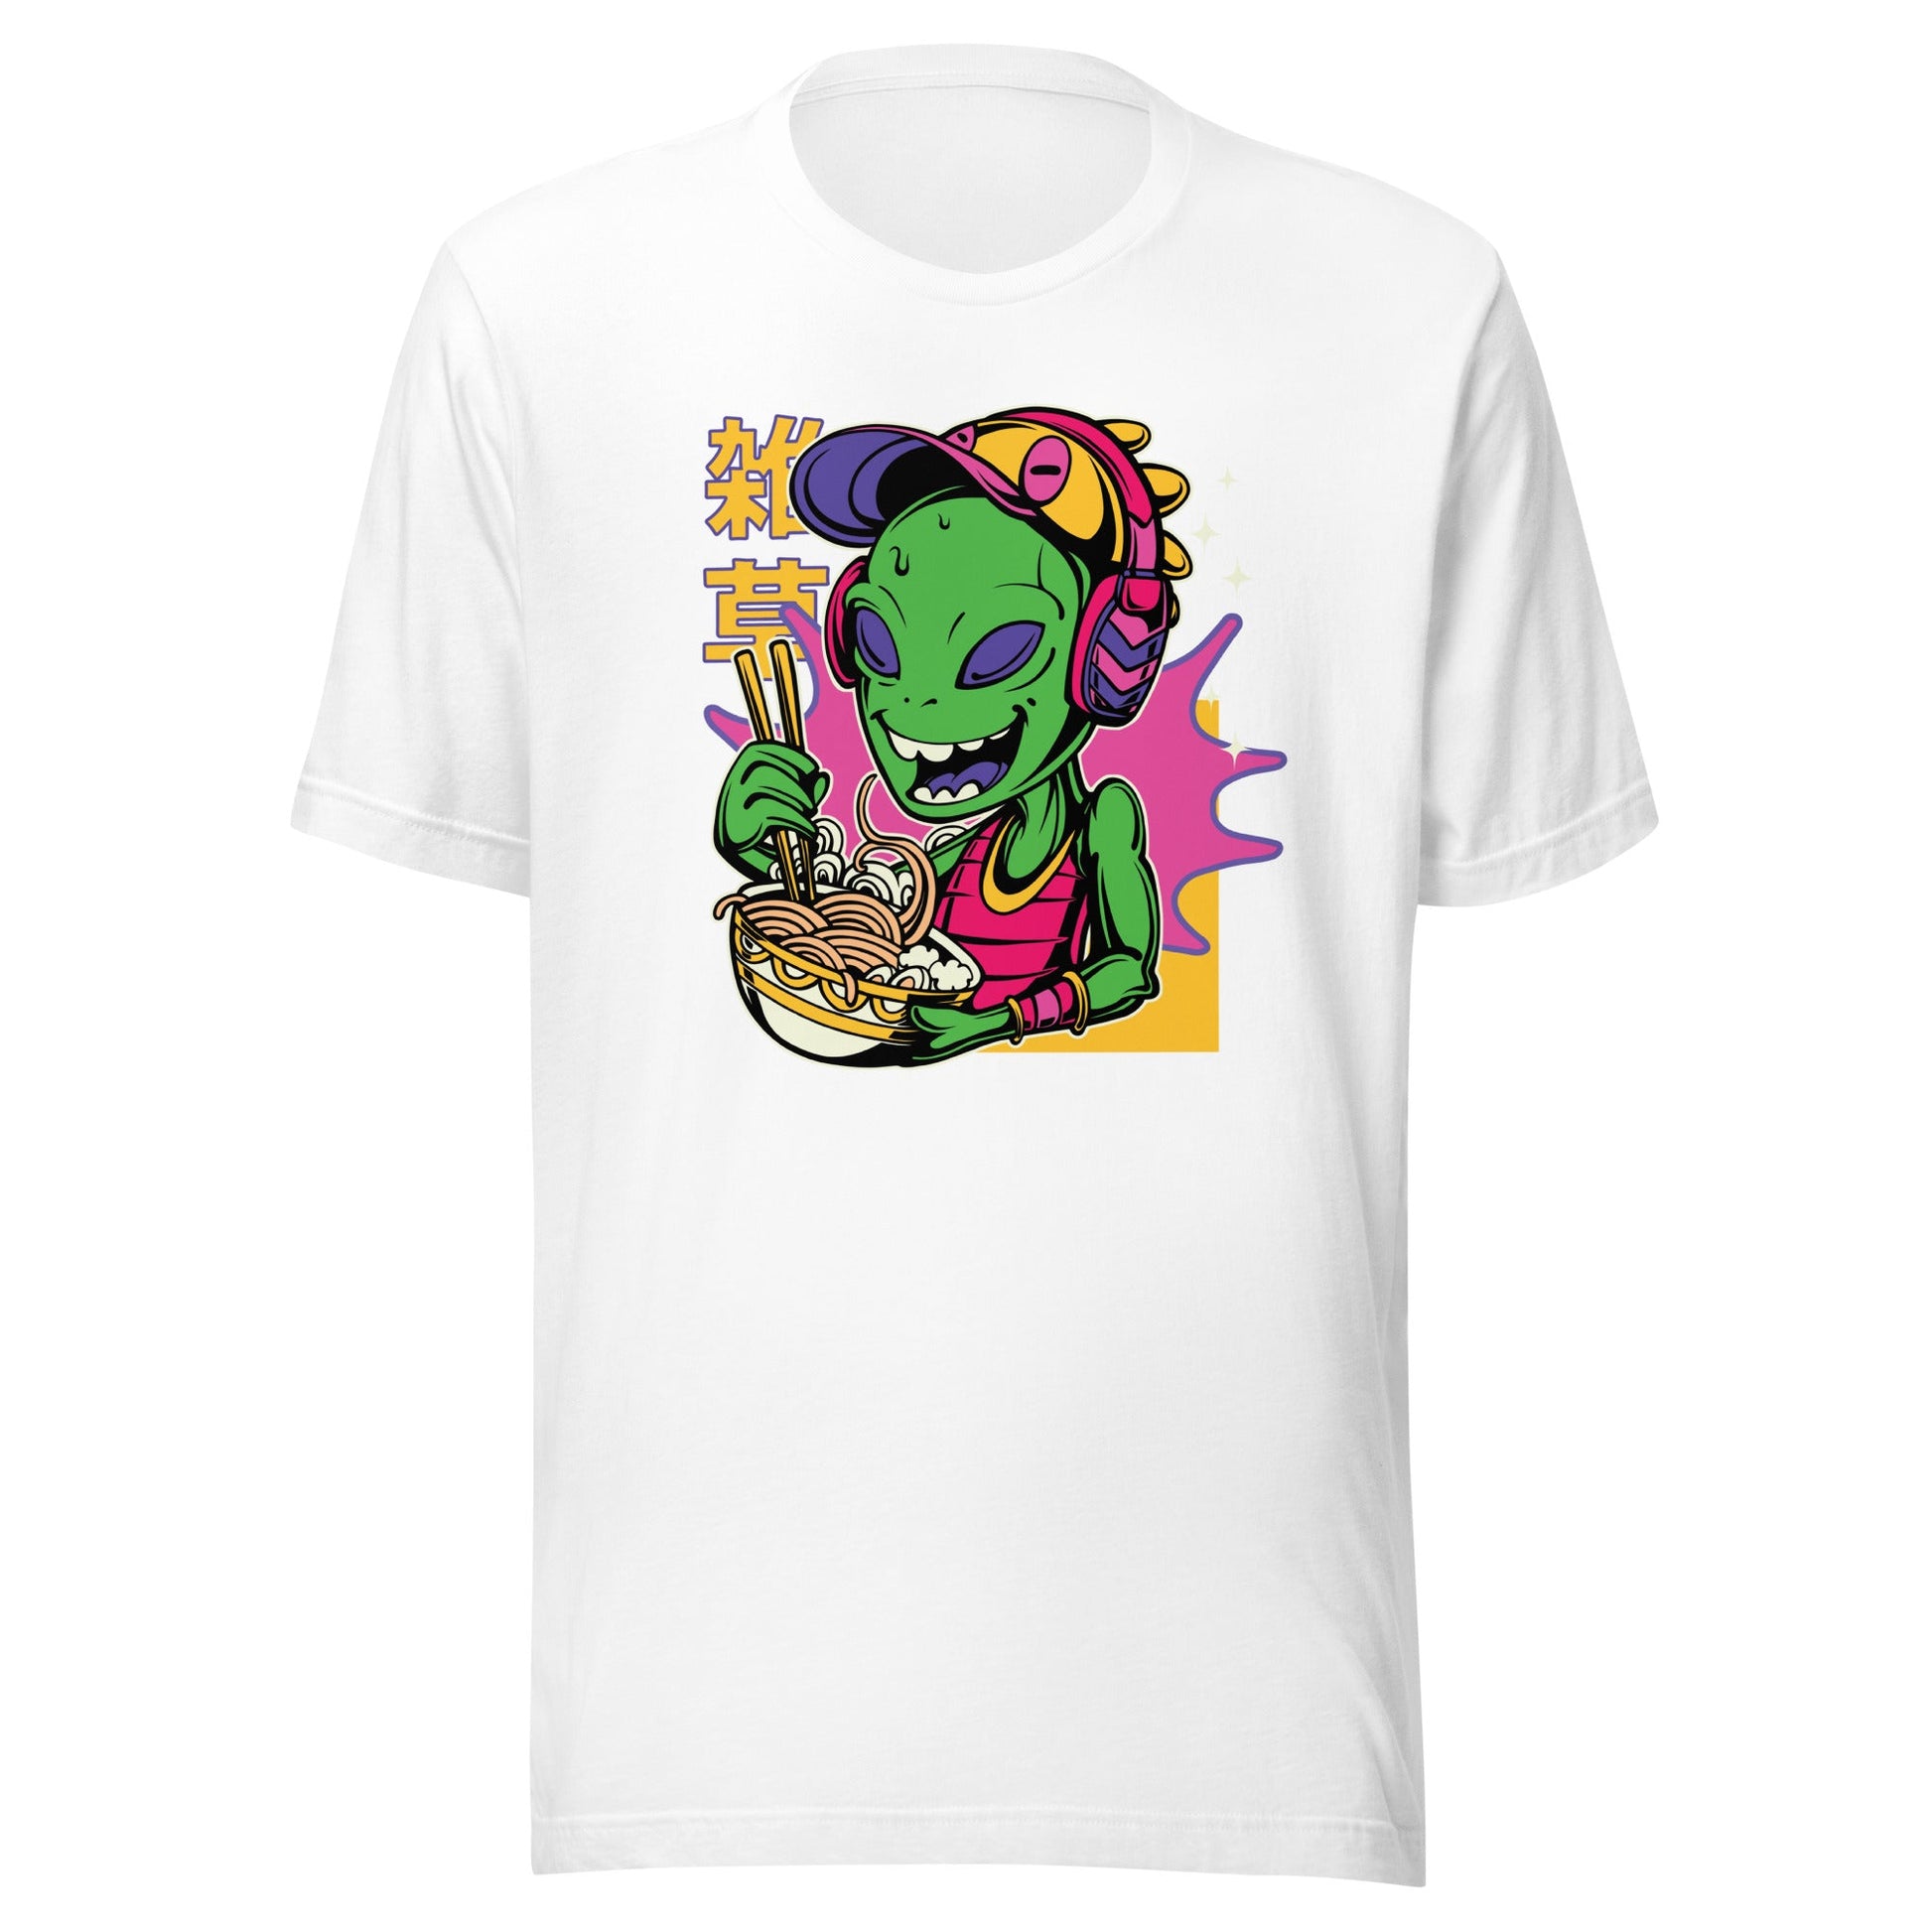 Alien Eating T-Shirt - Fun and Quirky Design | Express Your Extraterrestrial Side